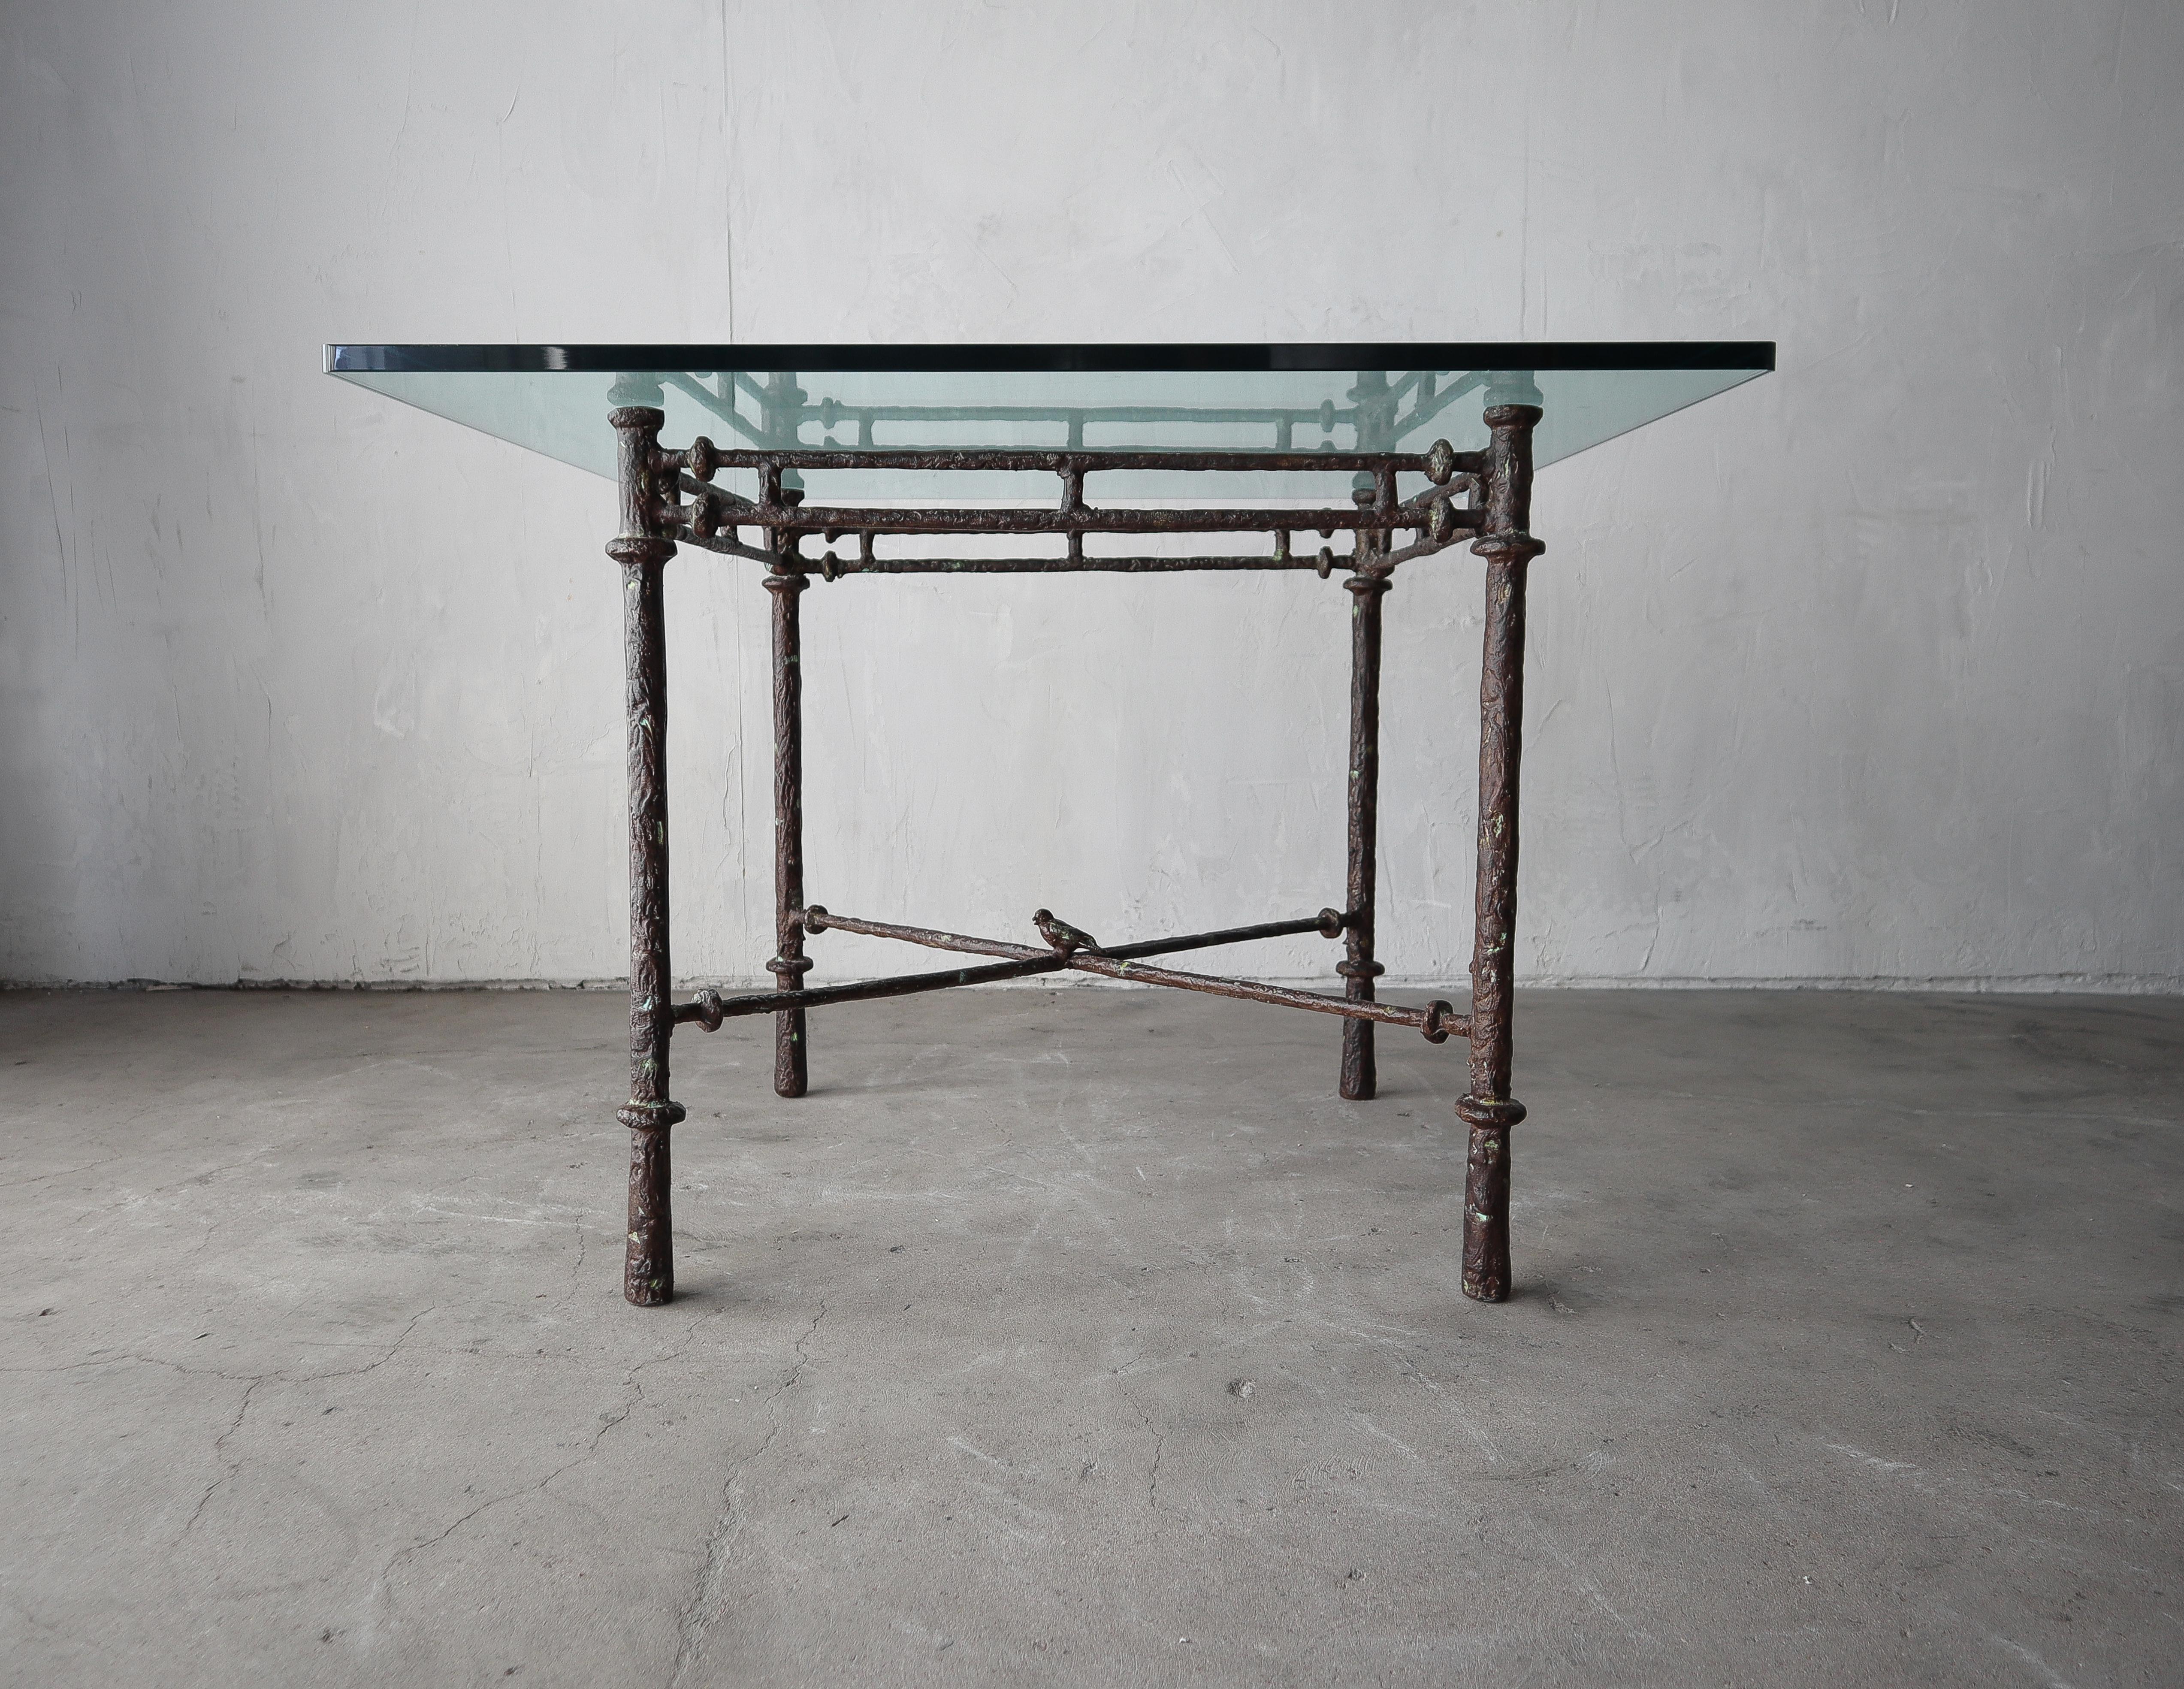 Absolutely stunning faux decorative bronze Dining table is the style of pieces by Diego Giacometti and Ilana Goor. Table is super designer and has a very classy look. The metal, finish and bird details add significant interest.

Base is in